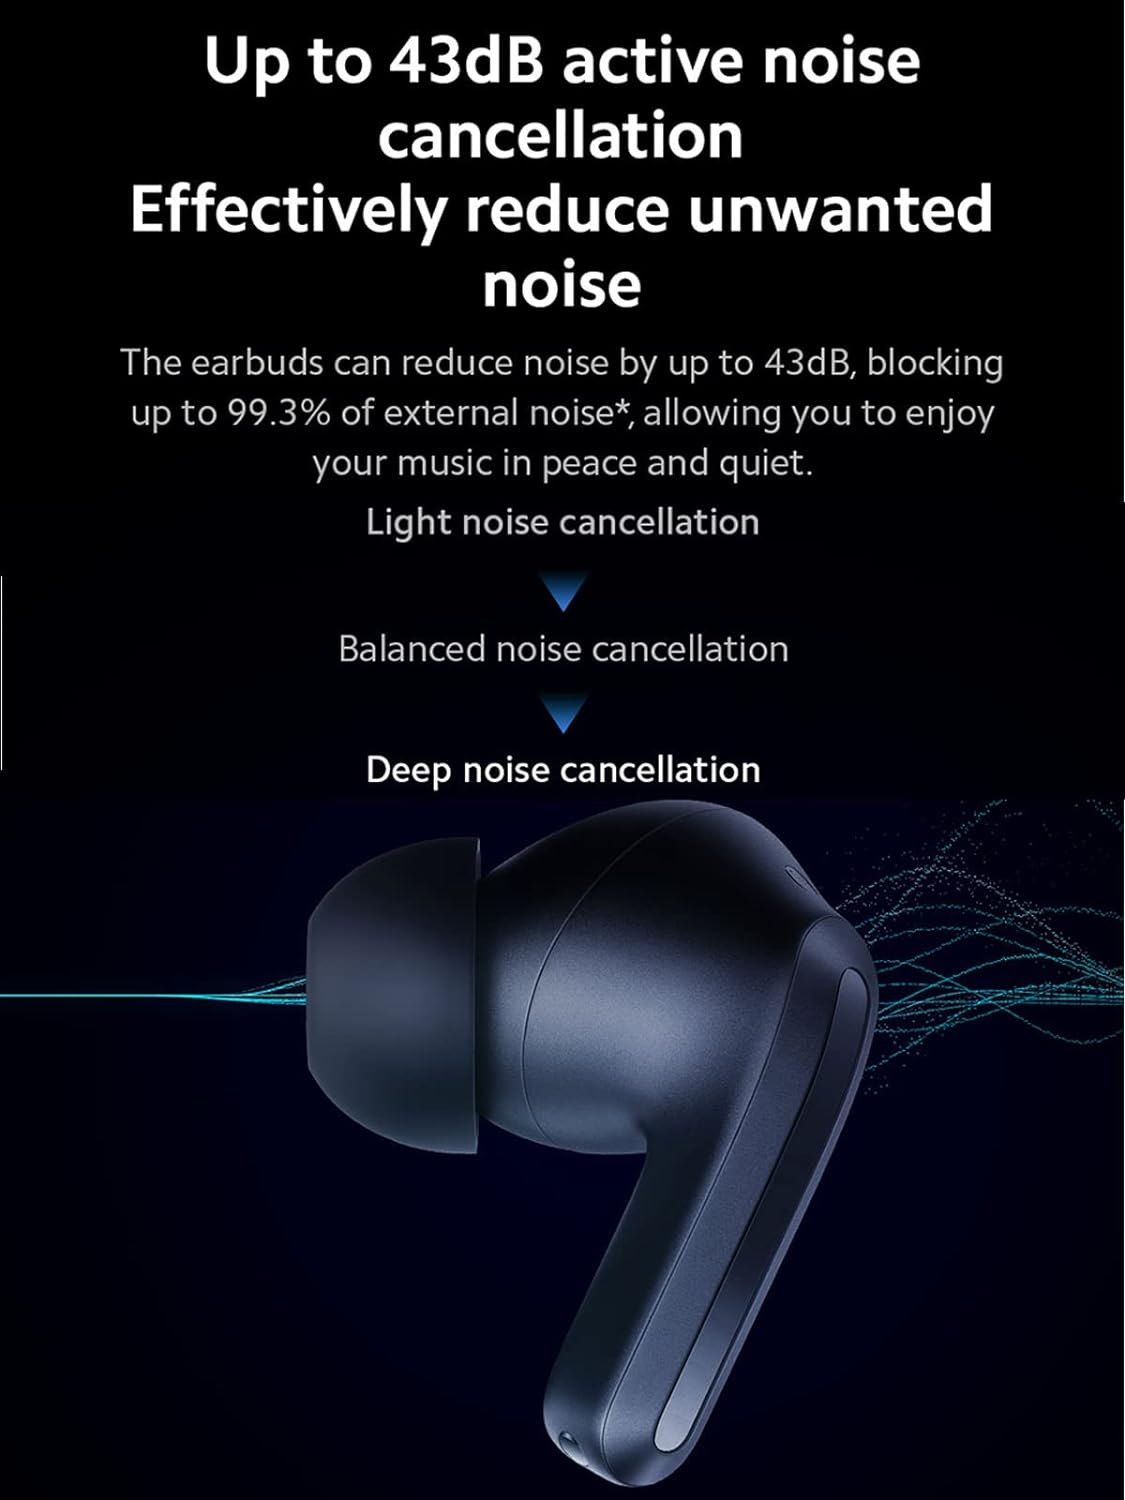 Xiaomi Redmi Buds 4 Pro Wireless Earbuds With Hi-Fi Sound,Active Noise Cancellation (ANC) Up to 43dB, Long Battery - Black